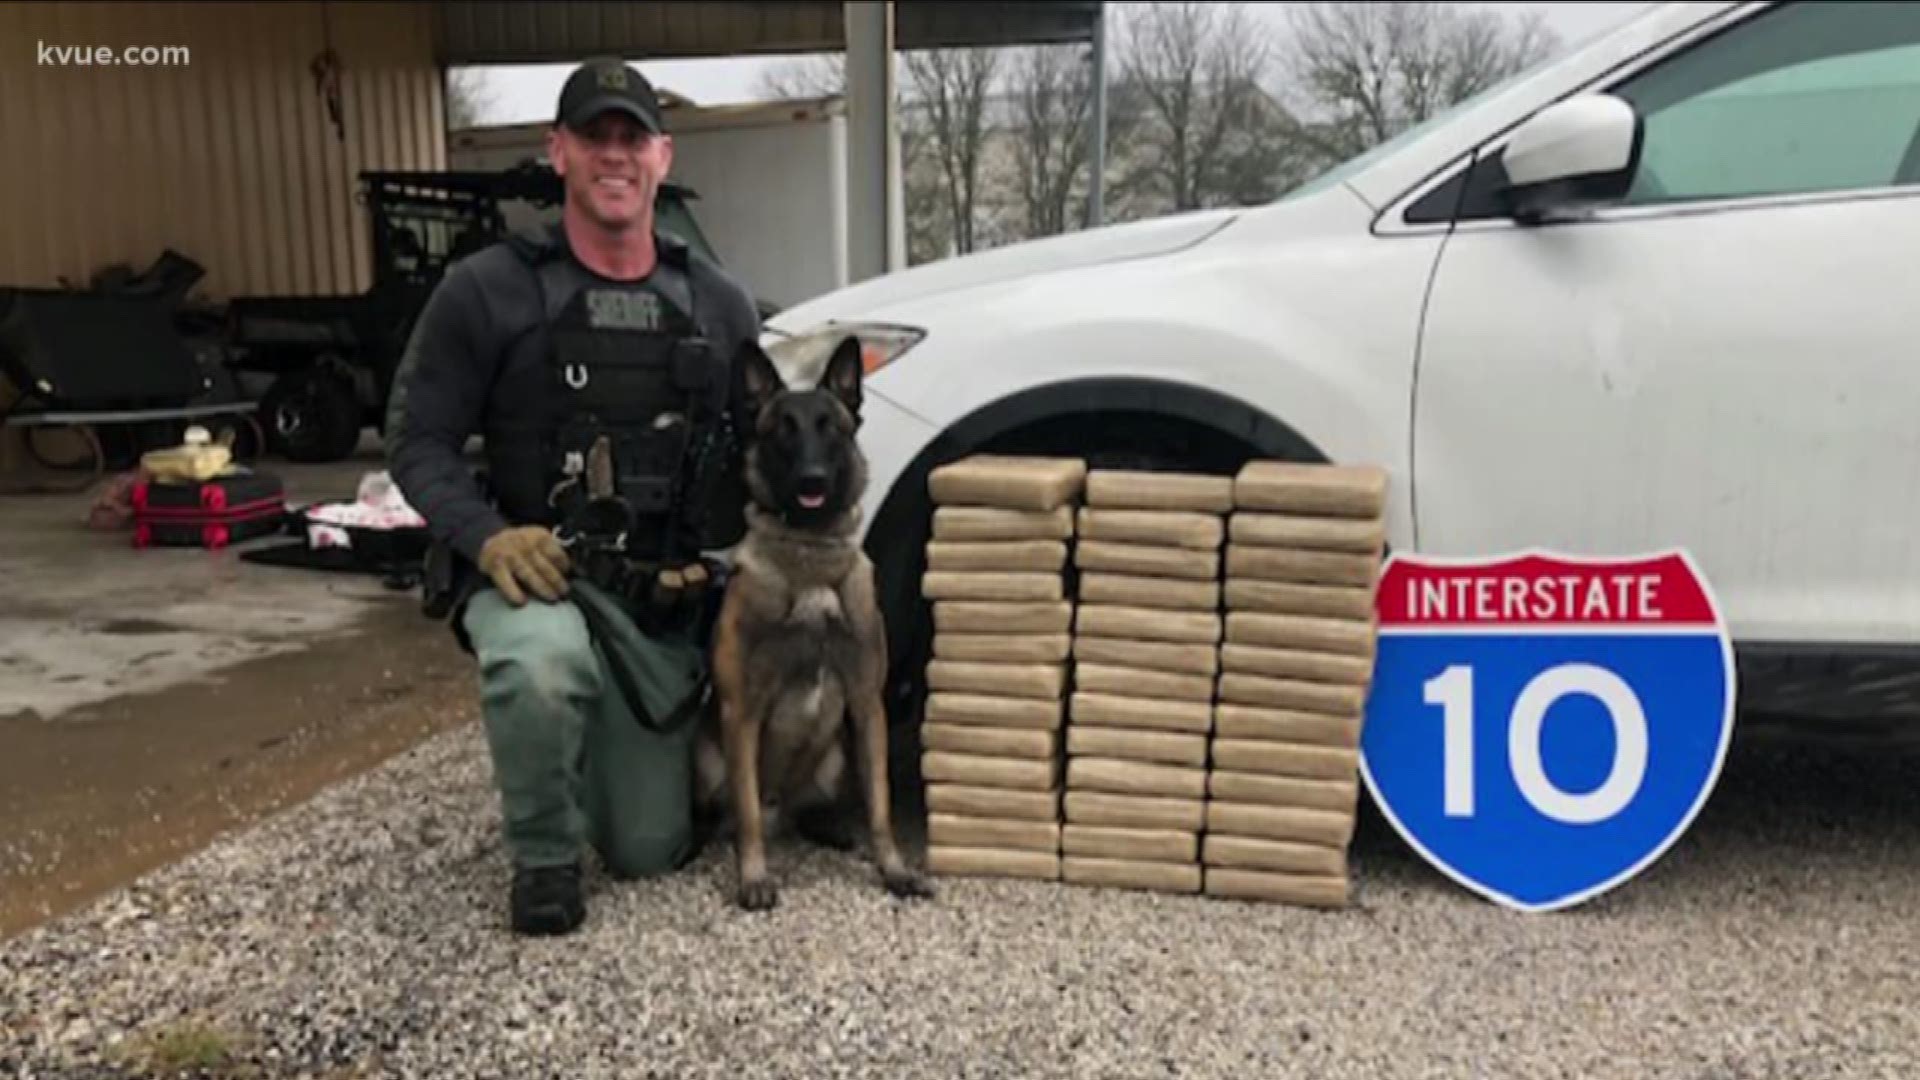 The new Fayette County K-9 helped sniff out $5 million in cocaine during a traffic stop on I-10 Friday.